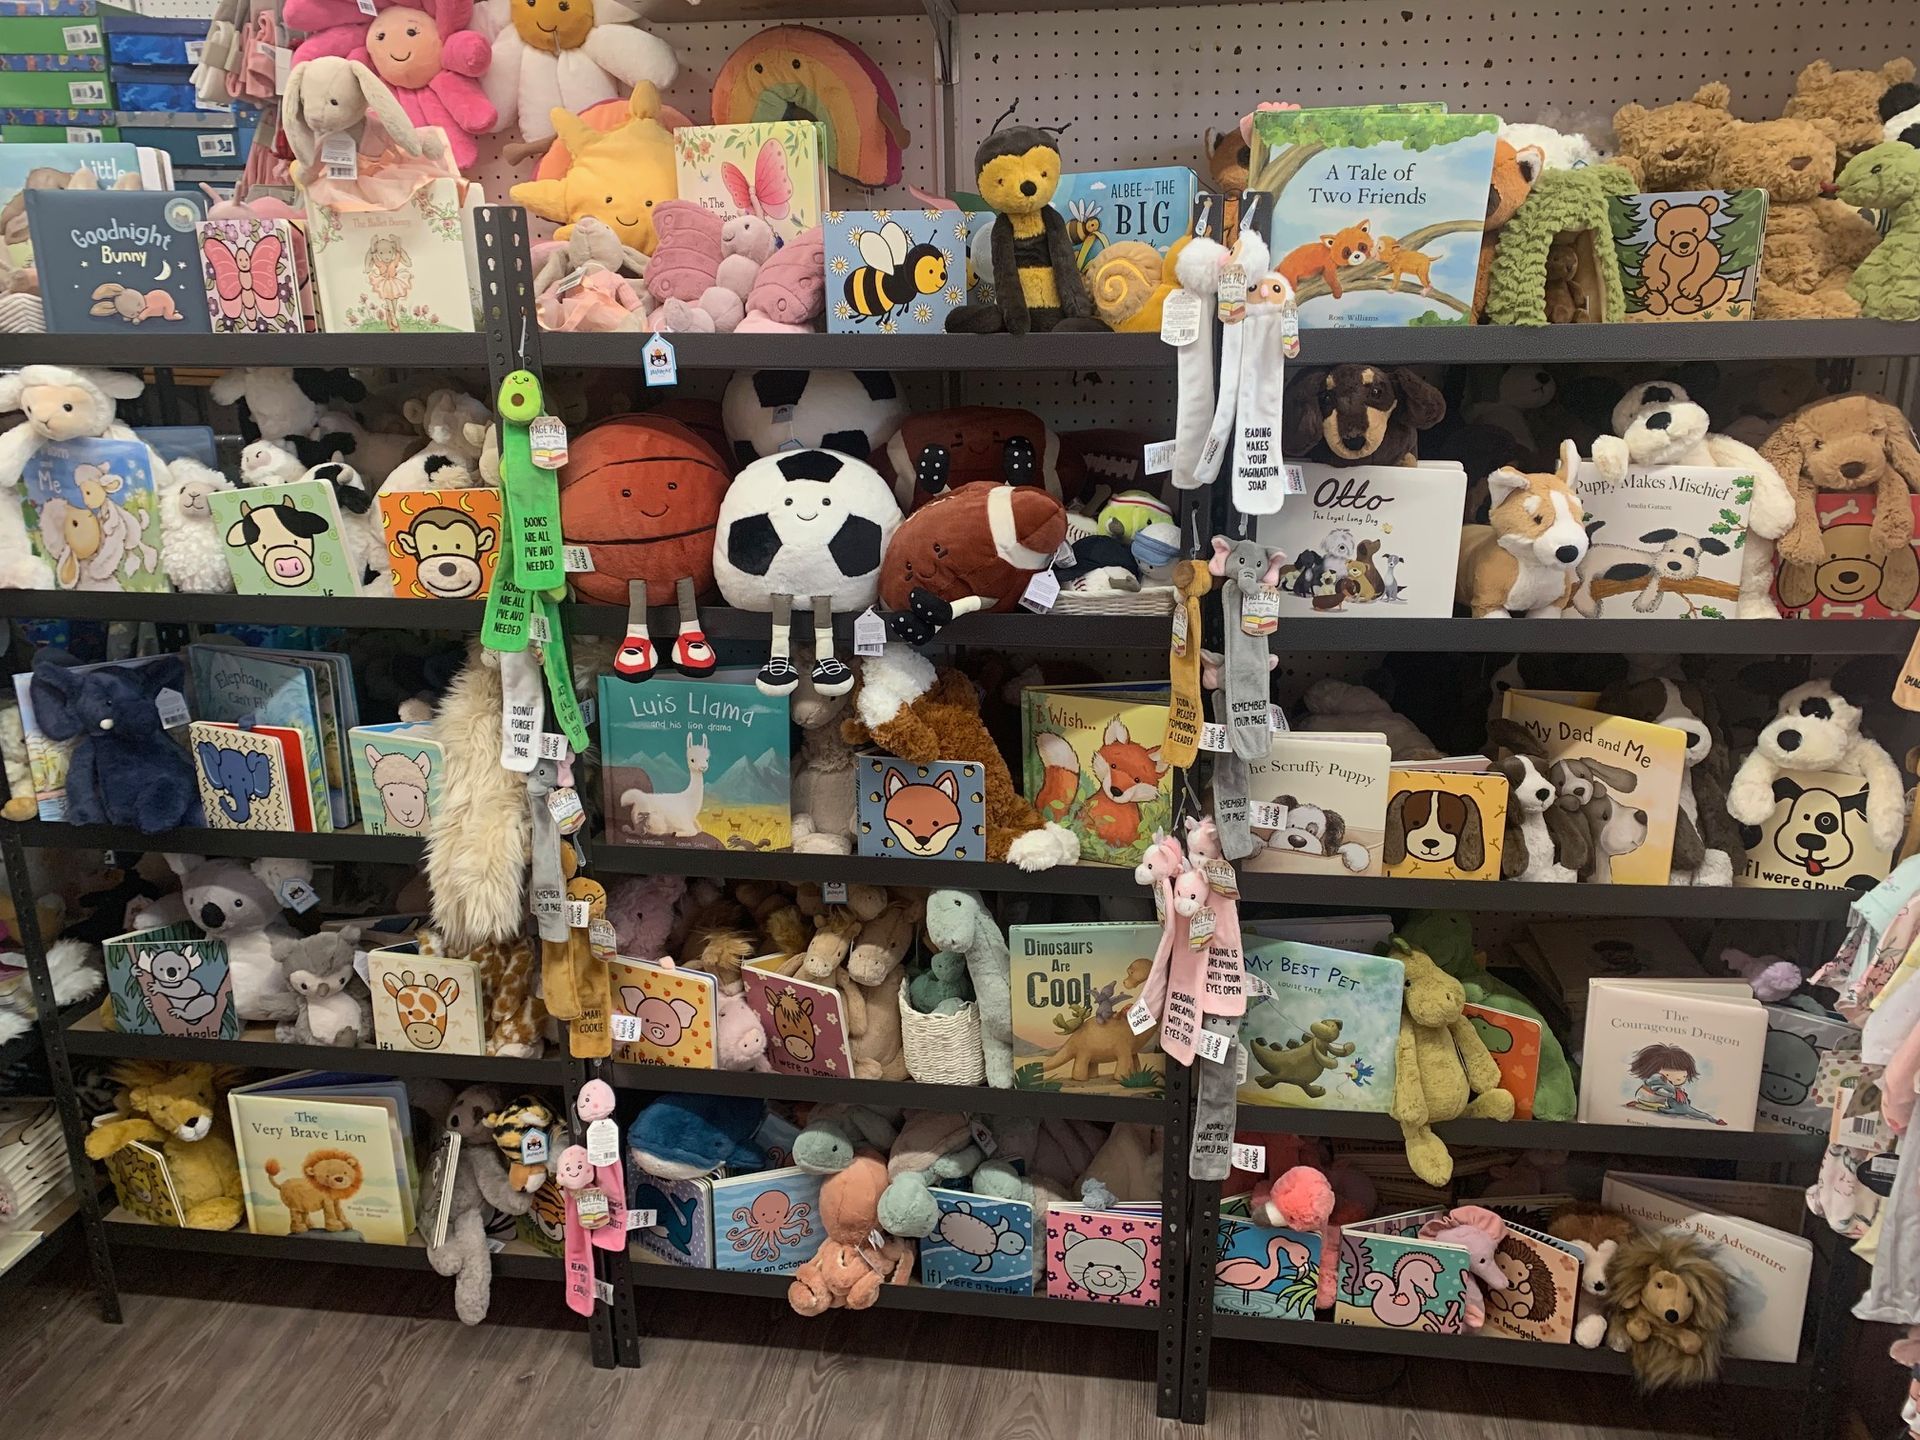 A store filled with lots of stuffed animals and books.